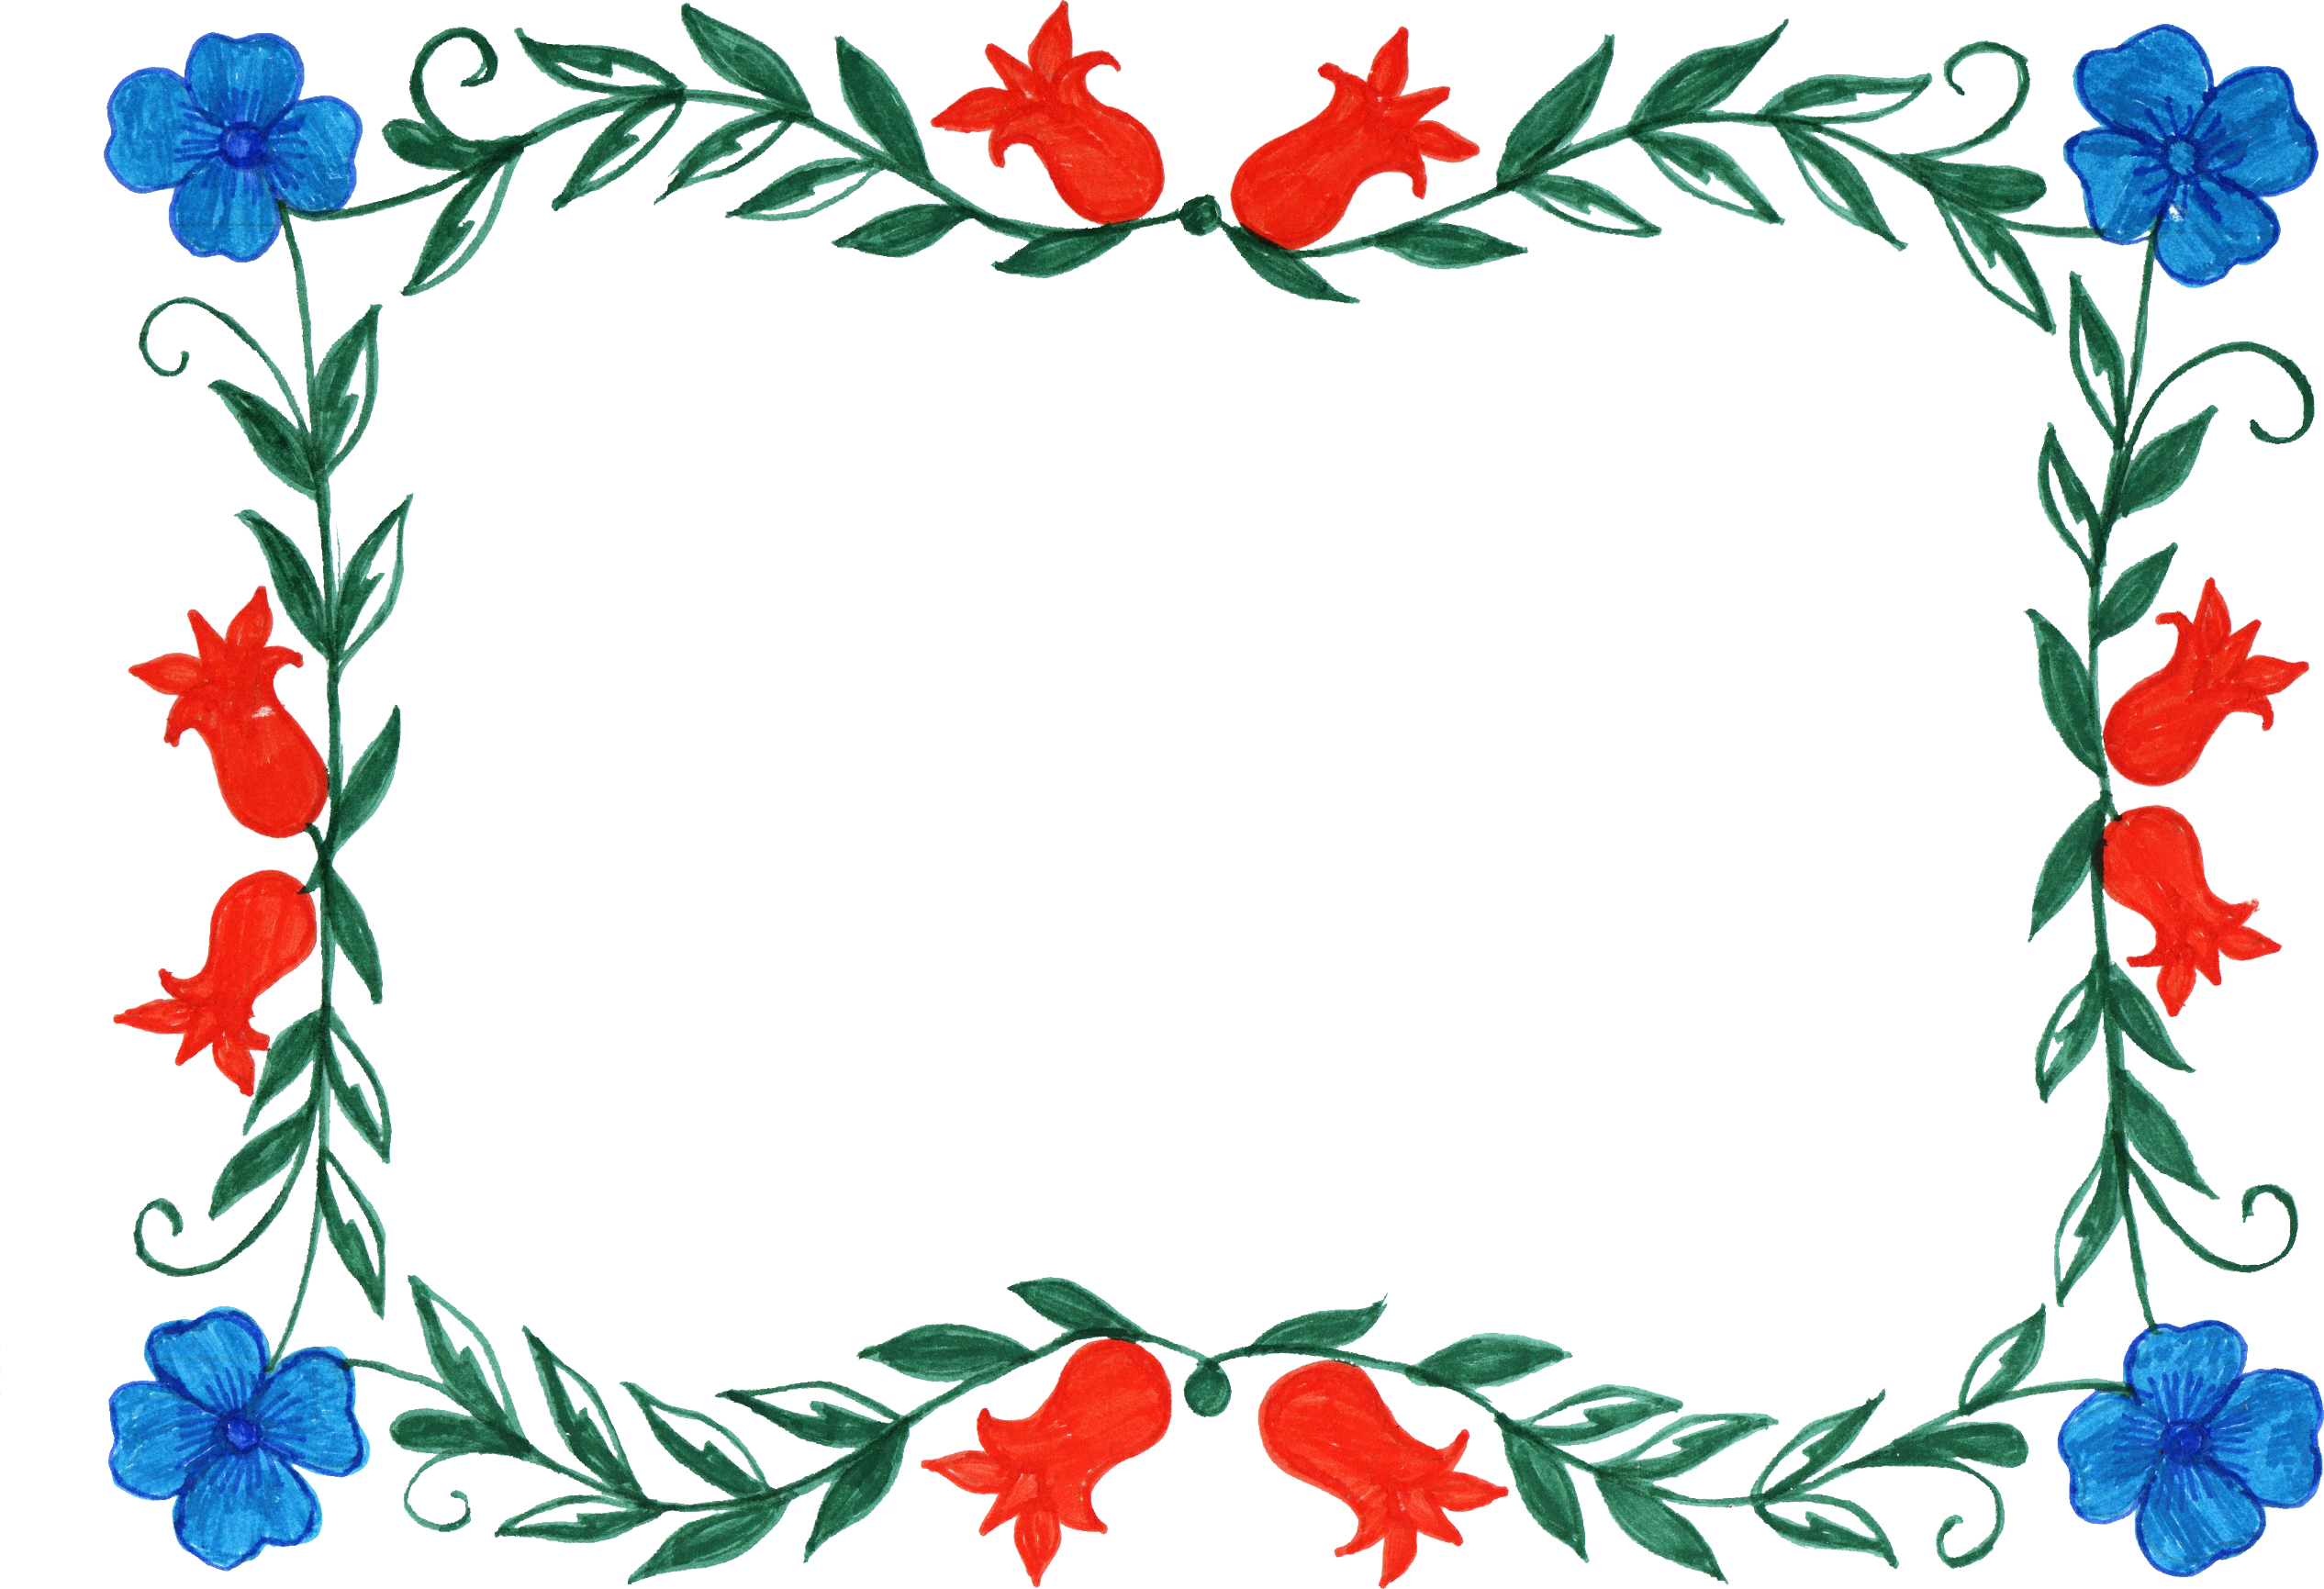 Flower Frame PNG HD Quality